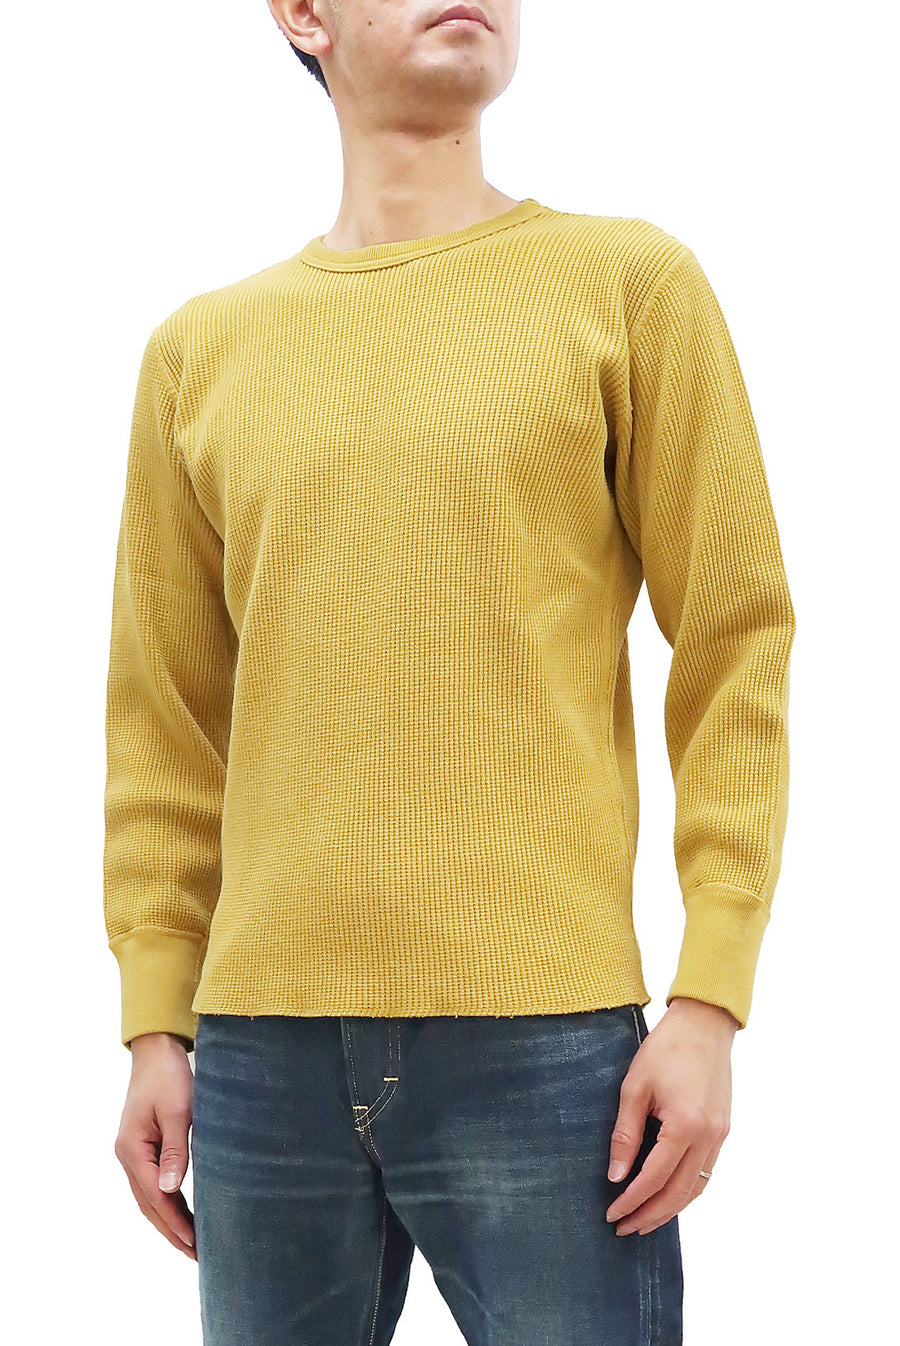 Bayside Heavyweight 7.5 oz. Waffle Knit Thermal Long Sleeve with